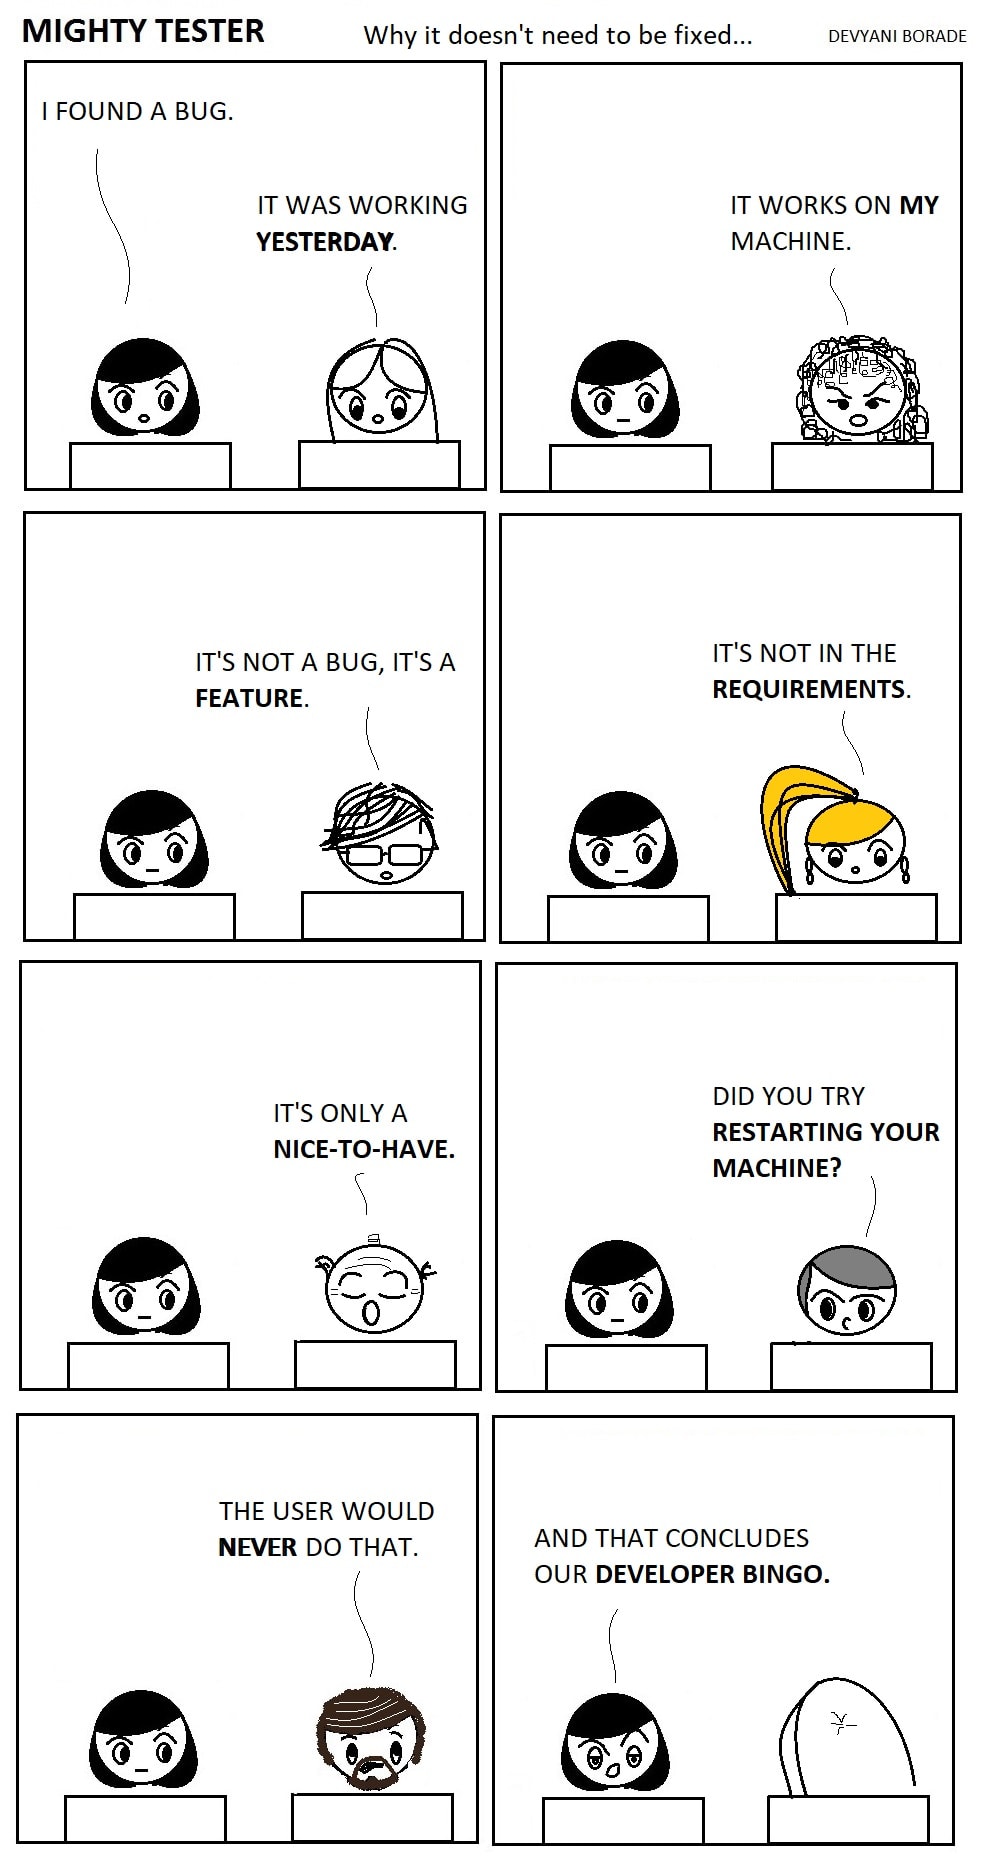 Image showing comic strip. In each frame, the tester is speaking with another developer. She says "I found a bug." Dev1: "It was working yesterday." Dev2: "It works on my machine" Dev3: "It's not a bug, it's a feature" Dev4: "It's not in the requirements." Dev5: "It's only a nice-to-have" Dev6: "Did you try restarting your machine?" Dev7: "The user would never do that" Finally in the last frame, the tester says to herself: "And that concludes our developer bingo"